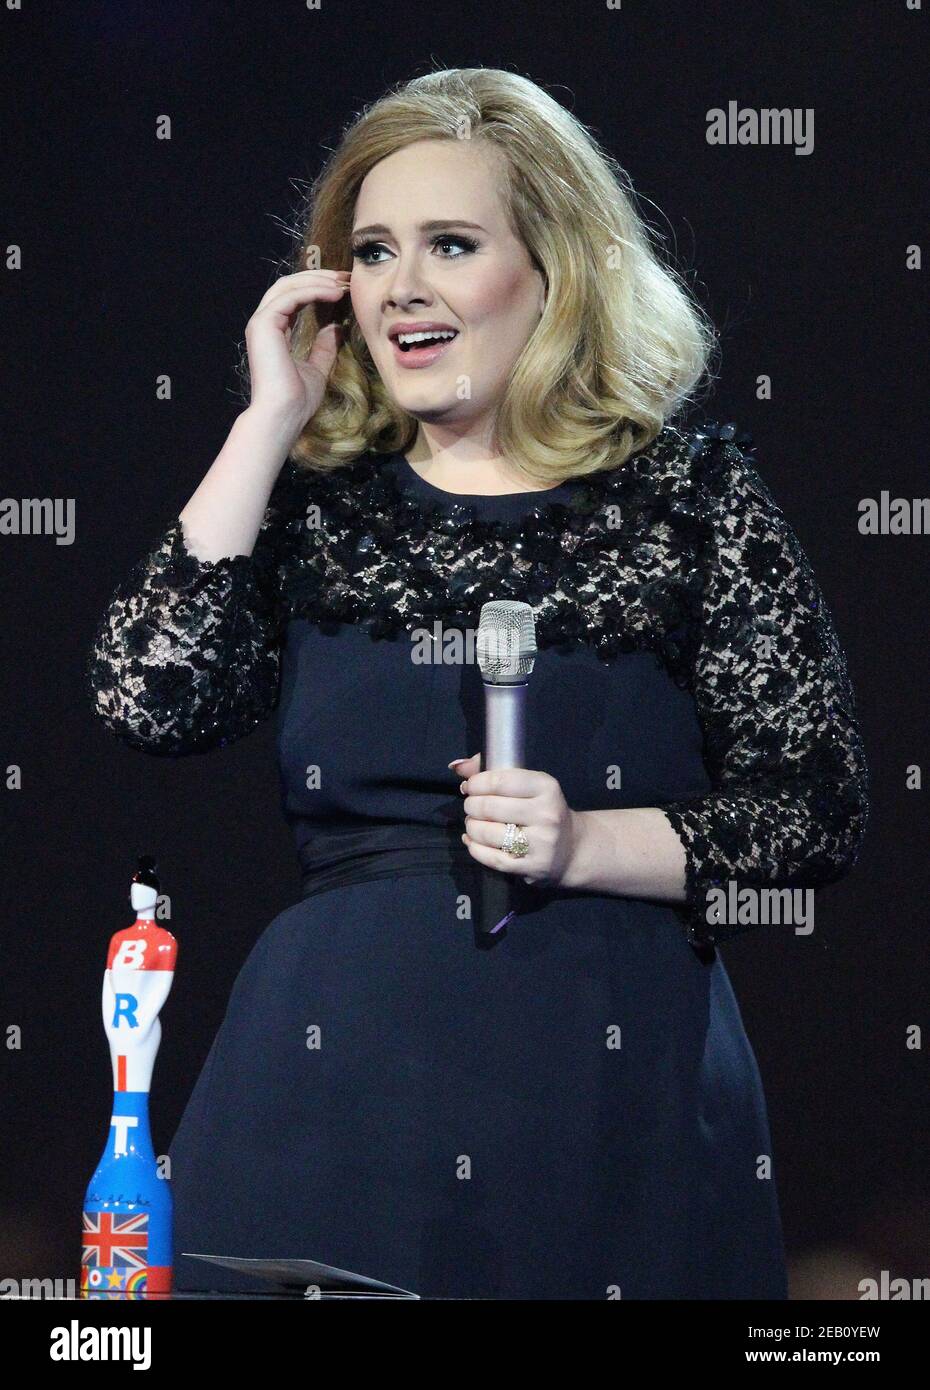 London, UK. 21st February 2012. Brit Awards 2012 - Show English Singer Adele receives a Brit Award for Album of the Year during the 2012 Brit awards at The O2 Arena, London. Stock Photo